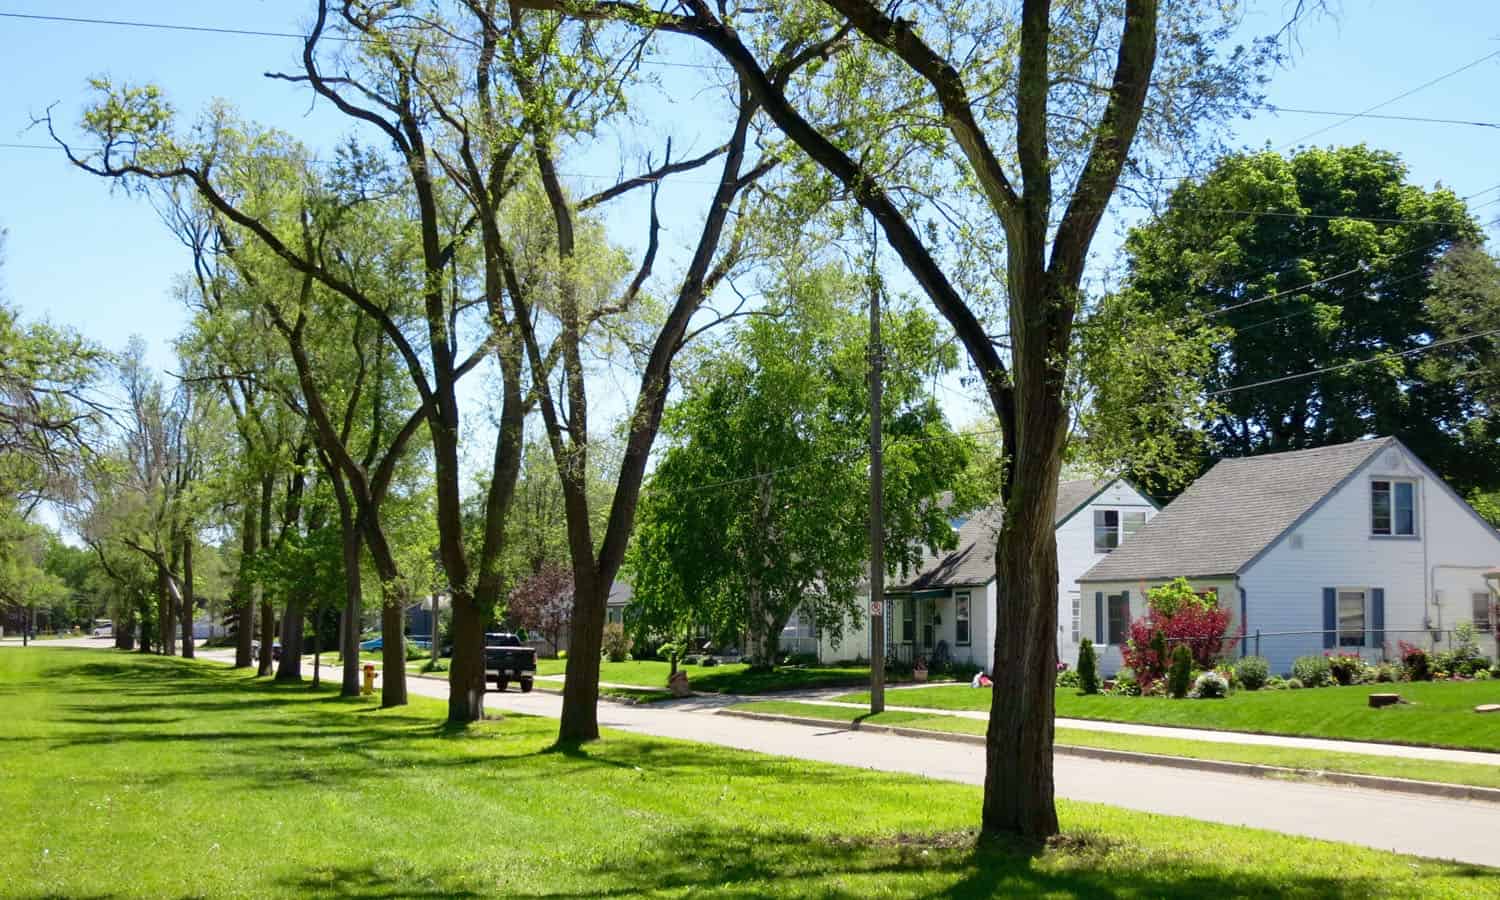 Veterans Green is a linear tree-lined park and the largest of the neighbourhood's public open space